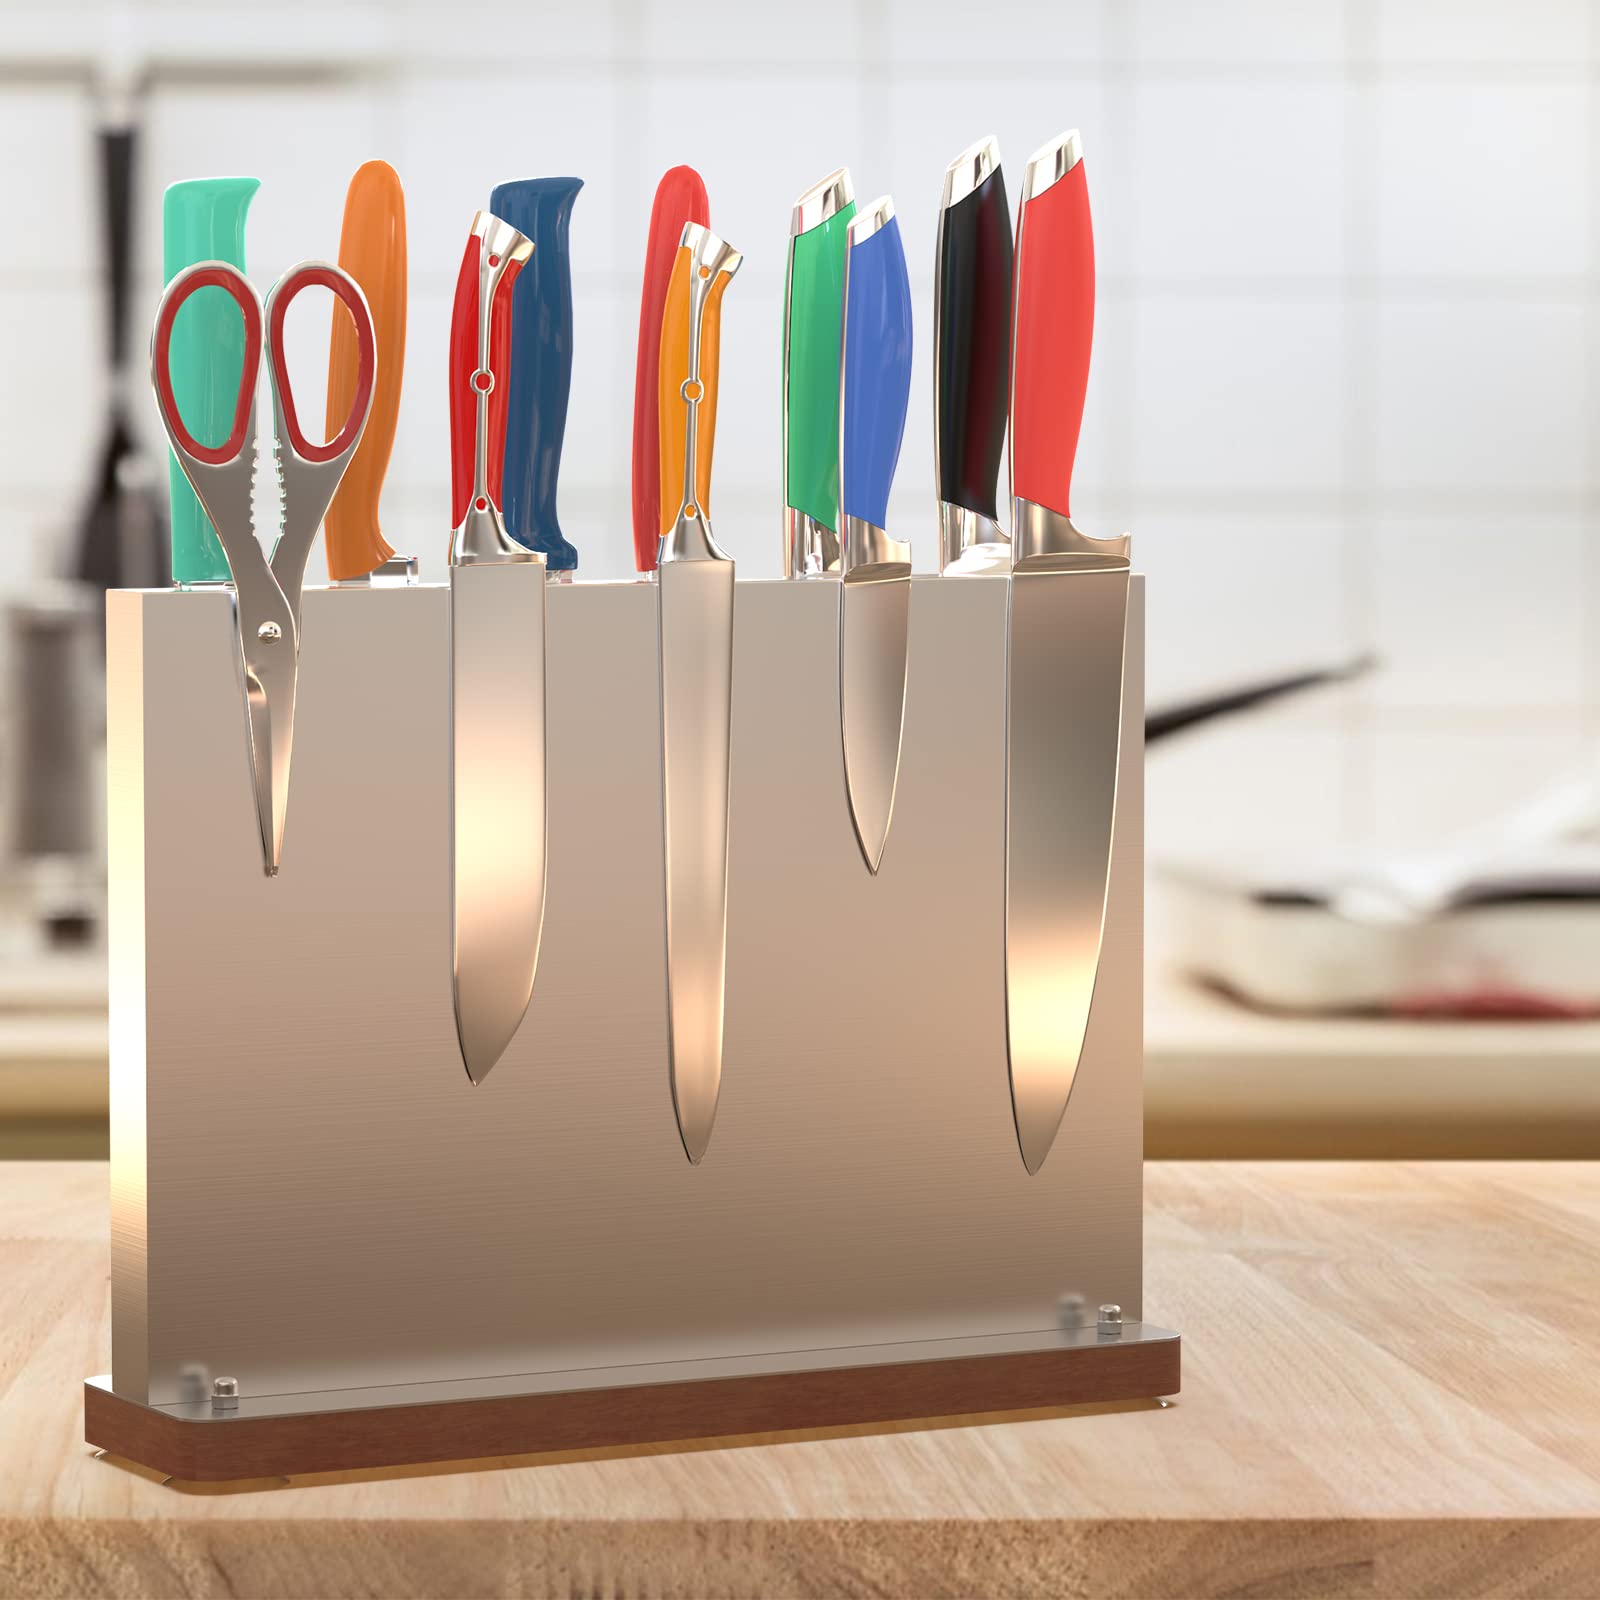 Magnetic Knife Block,Stainless Steel Magnetic Knife Holder Rack for Kitchen Counter,Strong Double Sided Magnet Knife Storage Stand with Wood Base